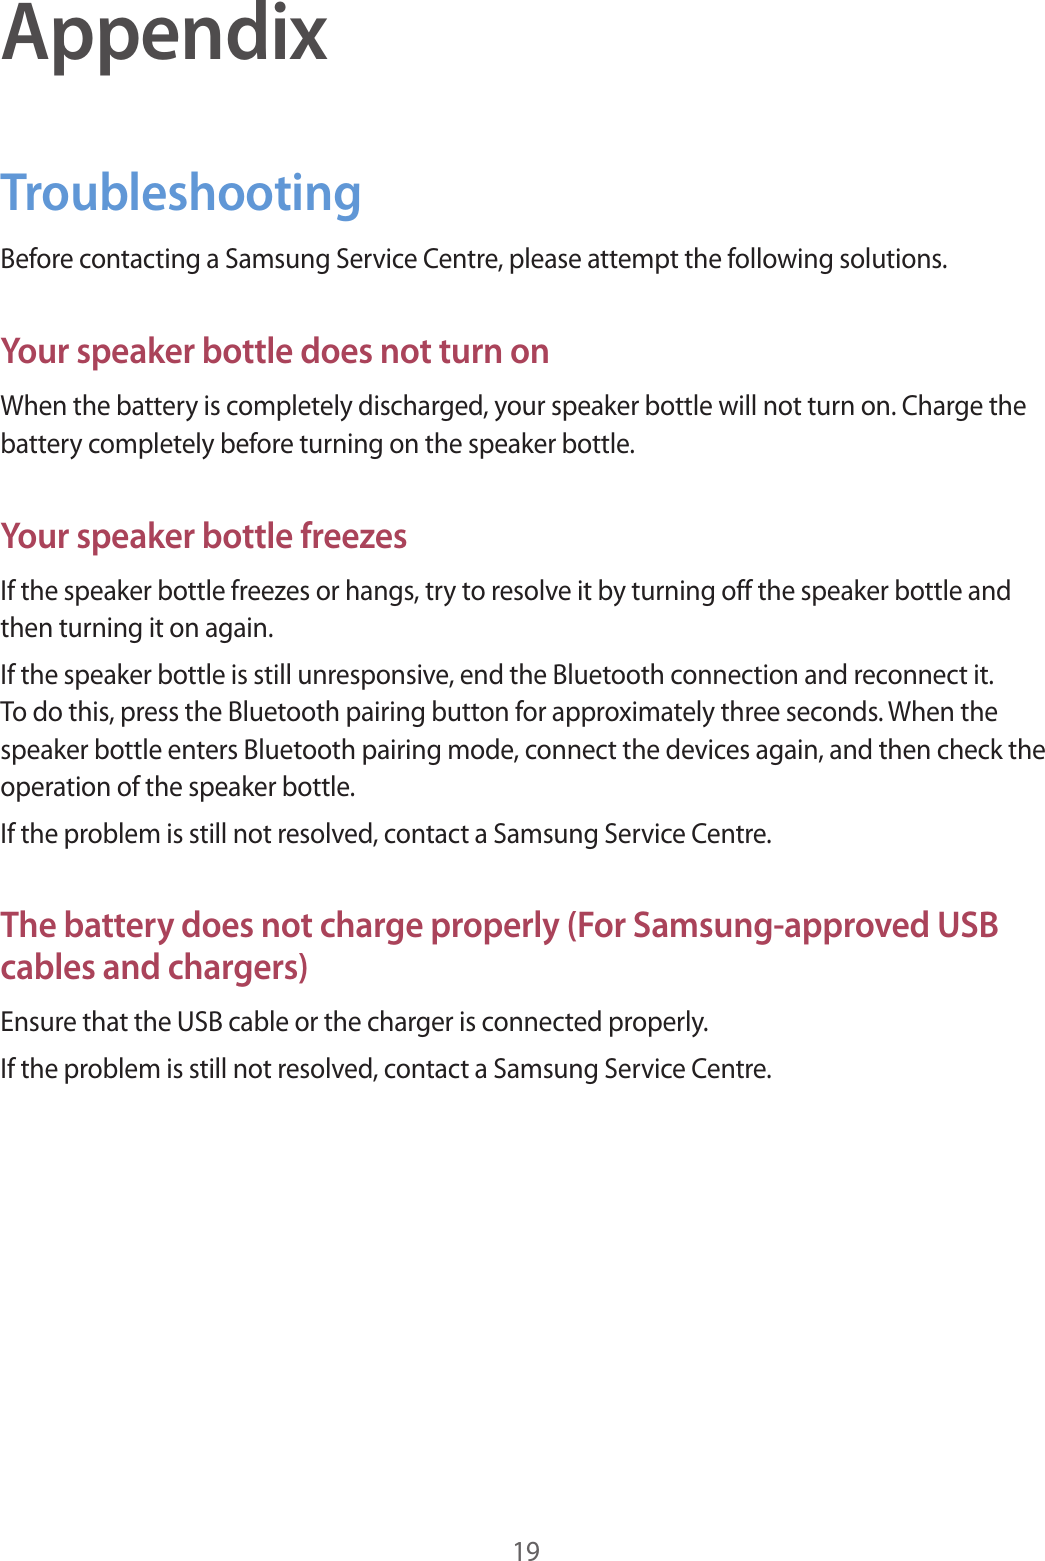 19AppendixTroubleshootingBefore contacting a Samsung Service Centre, please attempt the following solutions.Your speaker bottle does not turn onWhen the battery is completely discharged, your speaker bottle will not turn on. Charge the battery completely before turning on the speaker bottle.Your speaker bottle freezesIf the speaker bottle freezes or hangs, try to resolve it by turning off the speaker bottle and then turning it on again.If the speaker bottle is still unresponsive, end the Bluetooth connection and reconnect it. To do this, press the Bluetooth pairing button for approximately three seconds. When the speaker bottle enters Bluetooth pairing mode, connect the devices again, and then check the operation of the speaker bottle.If the problem is still not resolved, contact a Samsung Service Centre.The battery does not charge properly (For Samsung-approved USB cables and chargers)Ensure that the USB cable or the charger is connected properly.If the problem is still not resolved, contact a Samsung Service Centre.